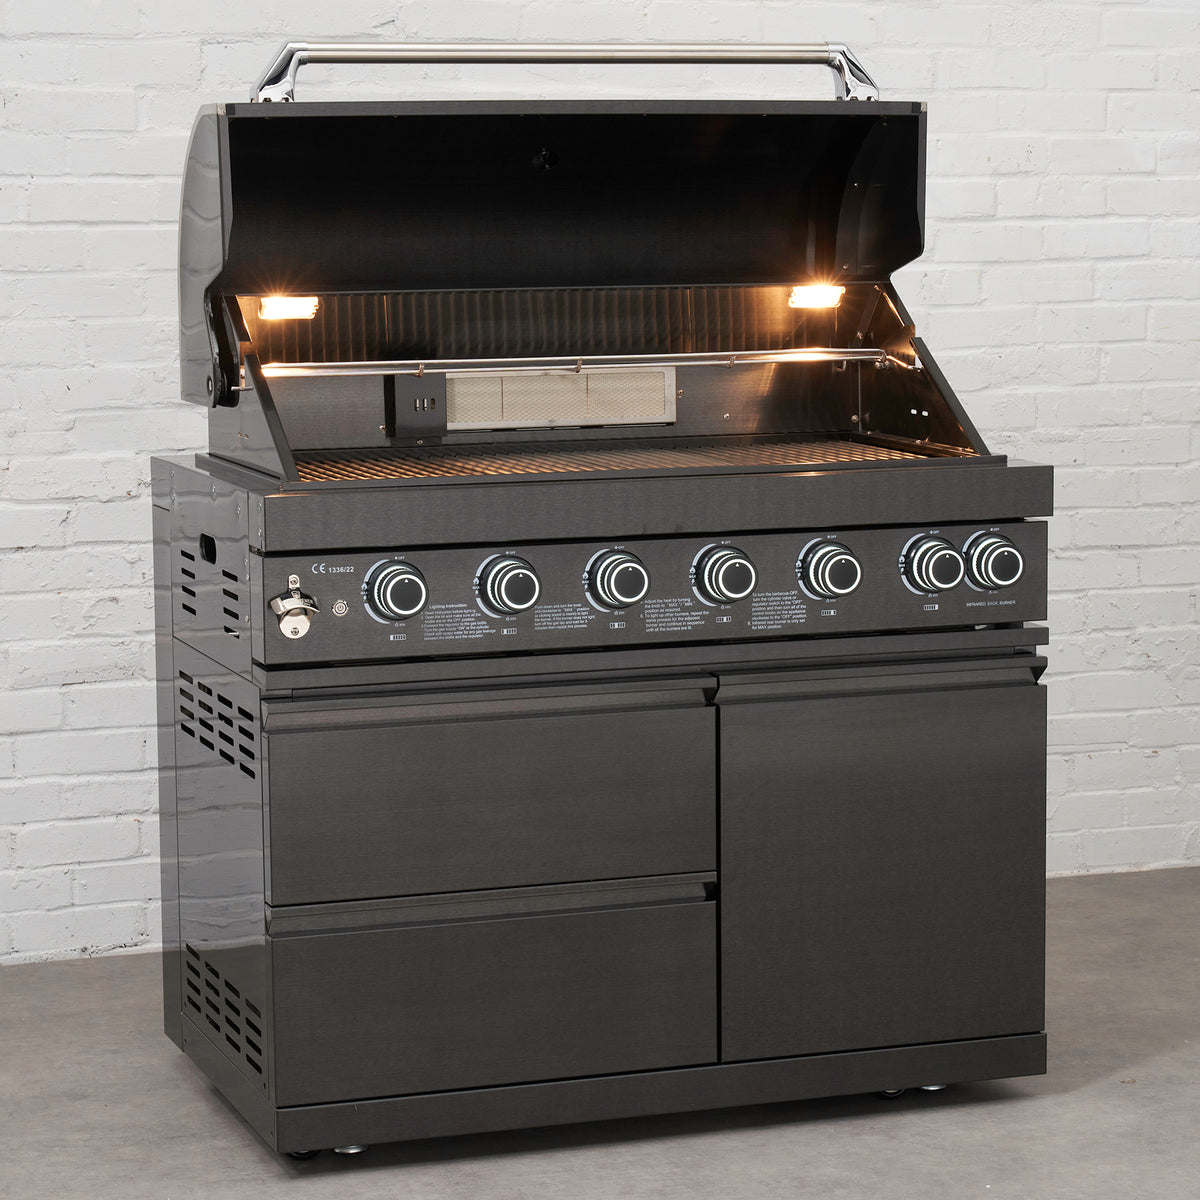 Draco Grills Outdoor Kitchen 6 Burner Black Stainless Steel Gas Barbecue